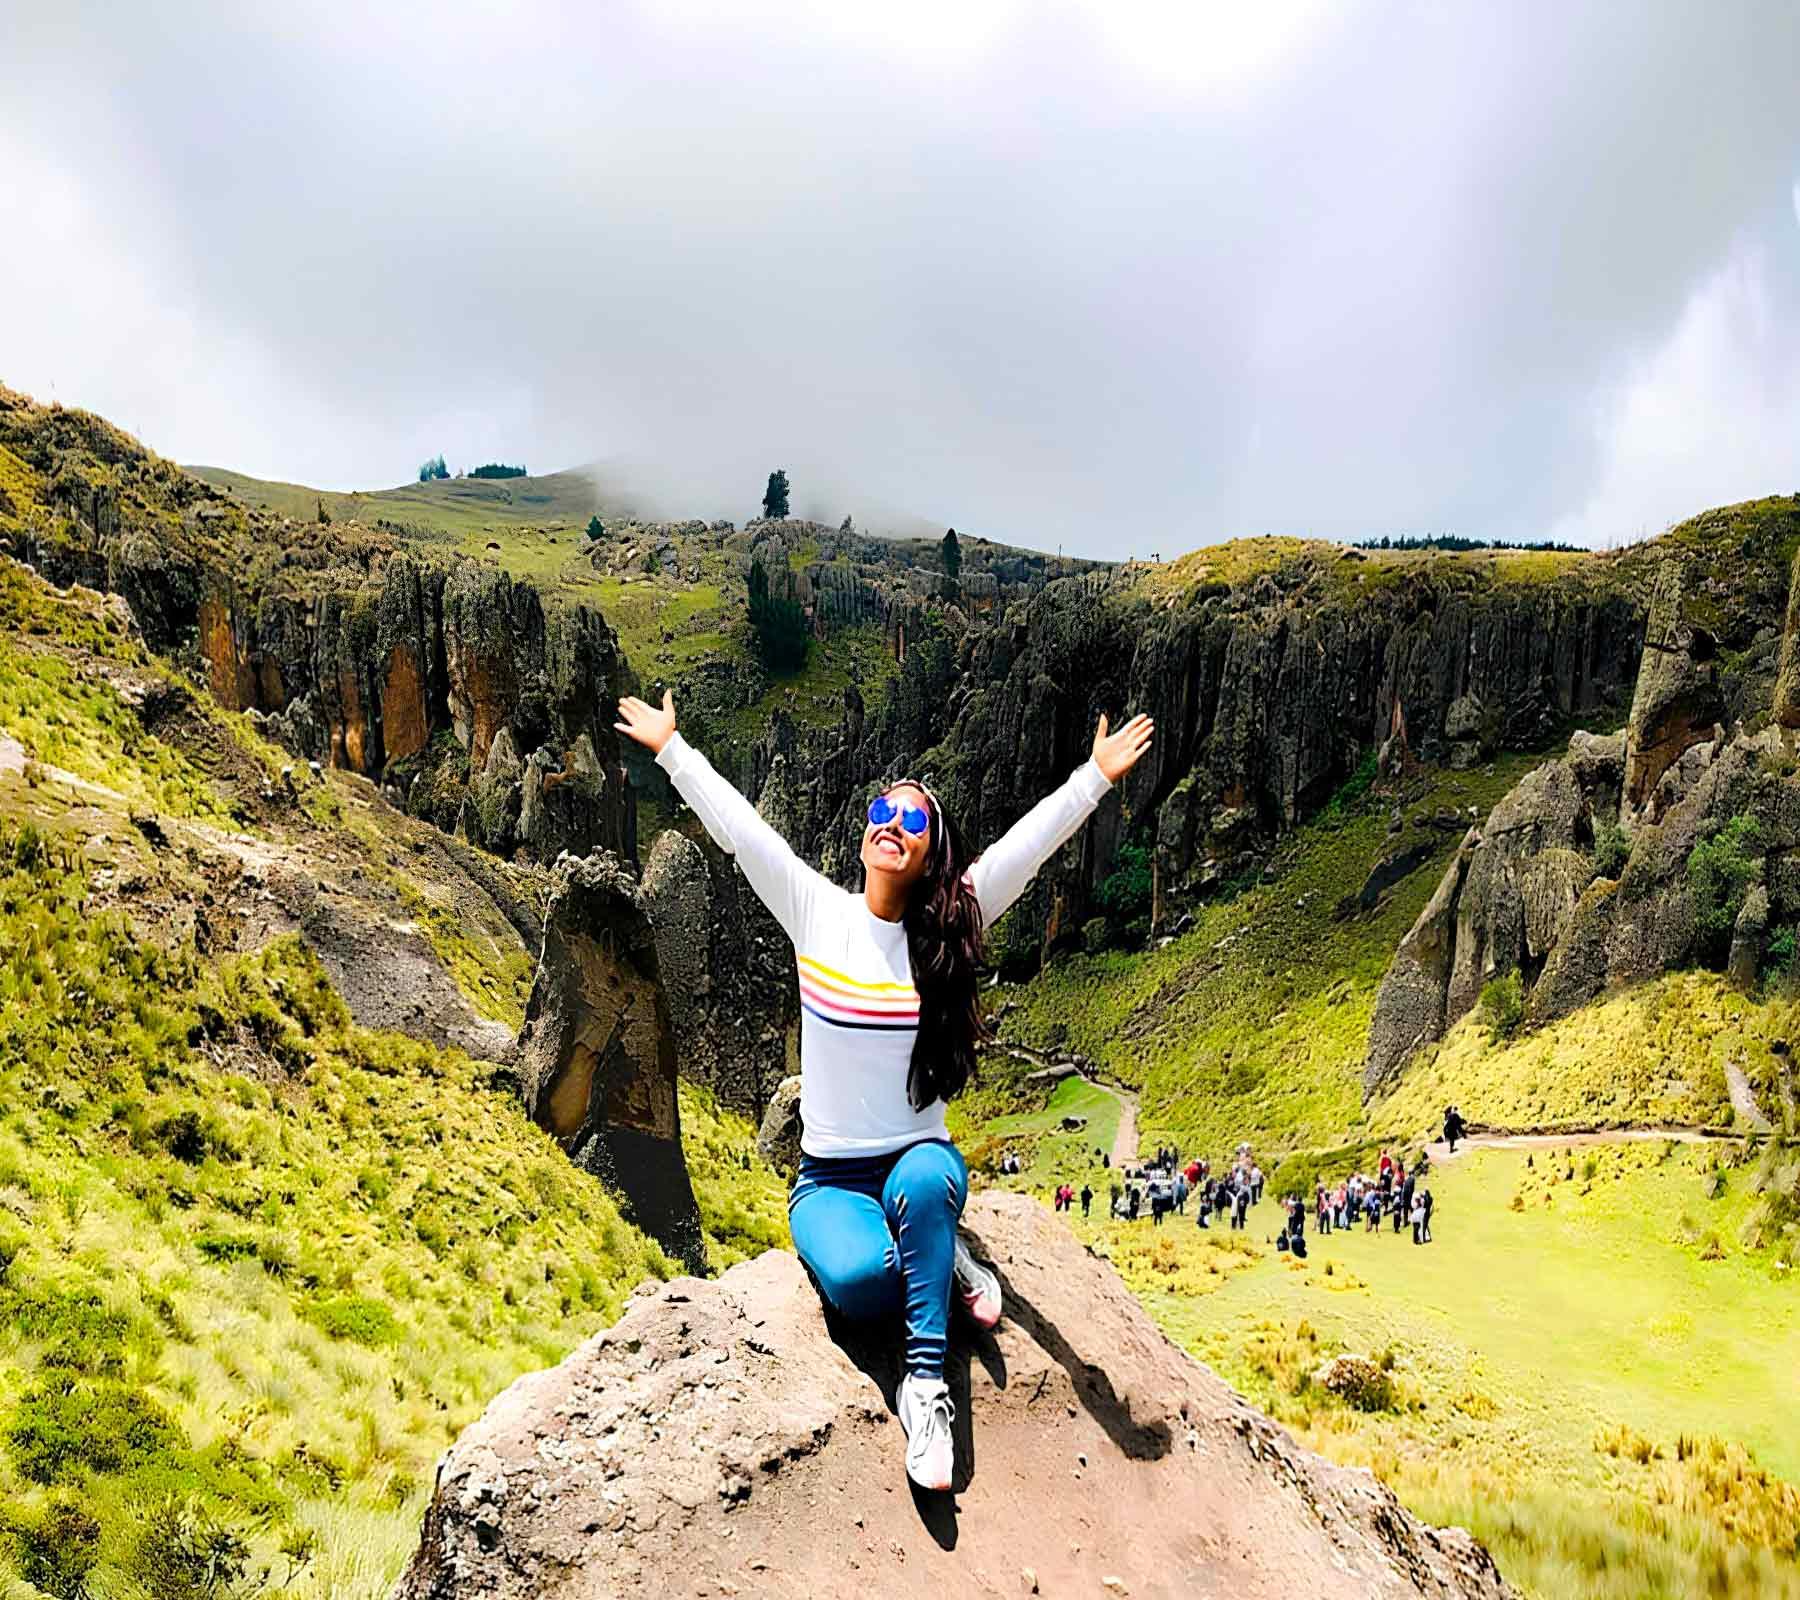 Cumbemayo: the amazing stone forest hidden at the top of Cajamarca